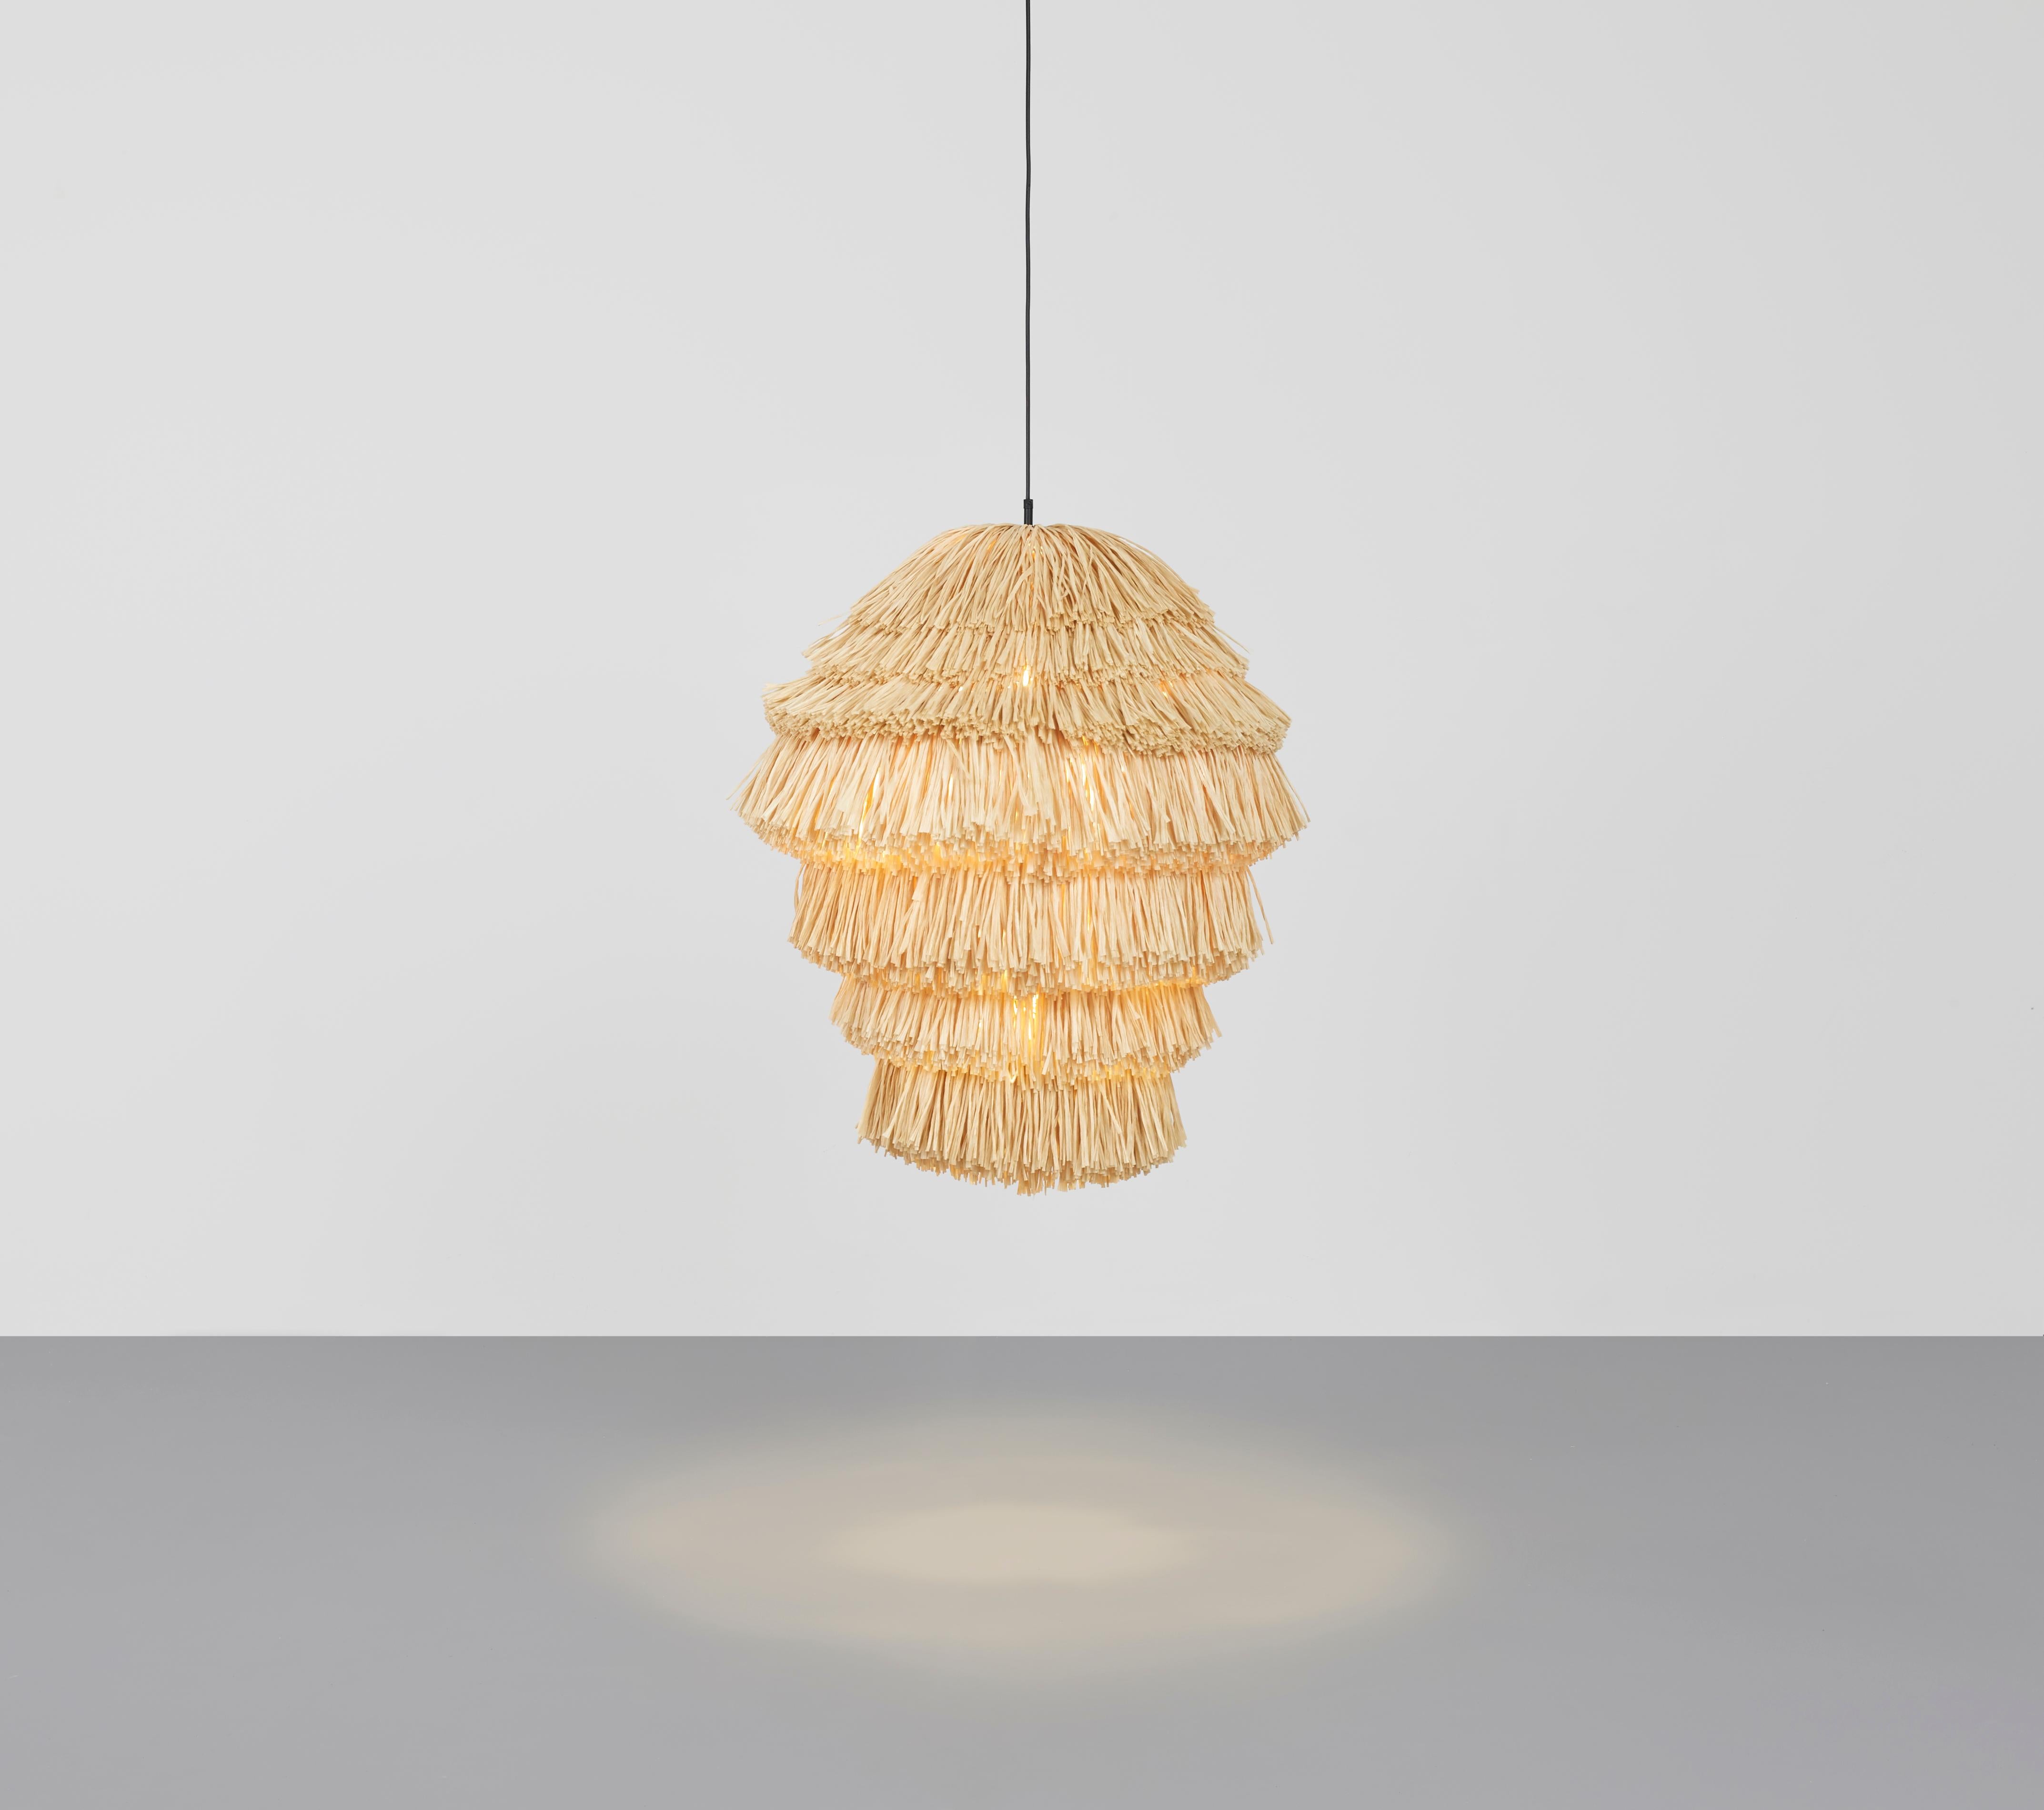 Fran AS lamp by Llot Llov
Handcrafted Light Object
Dimensions: Ø 65 cm x H: 90 cm
Materials: raffia fringes
Colour: beige
Also available in green, red, black. 

With their bulky silhouette and rustling fringes, the FRAN lights are reminiscent of a